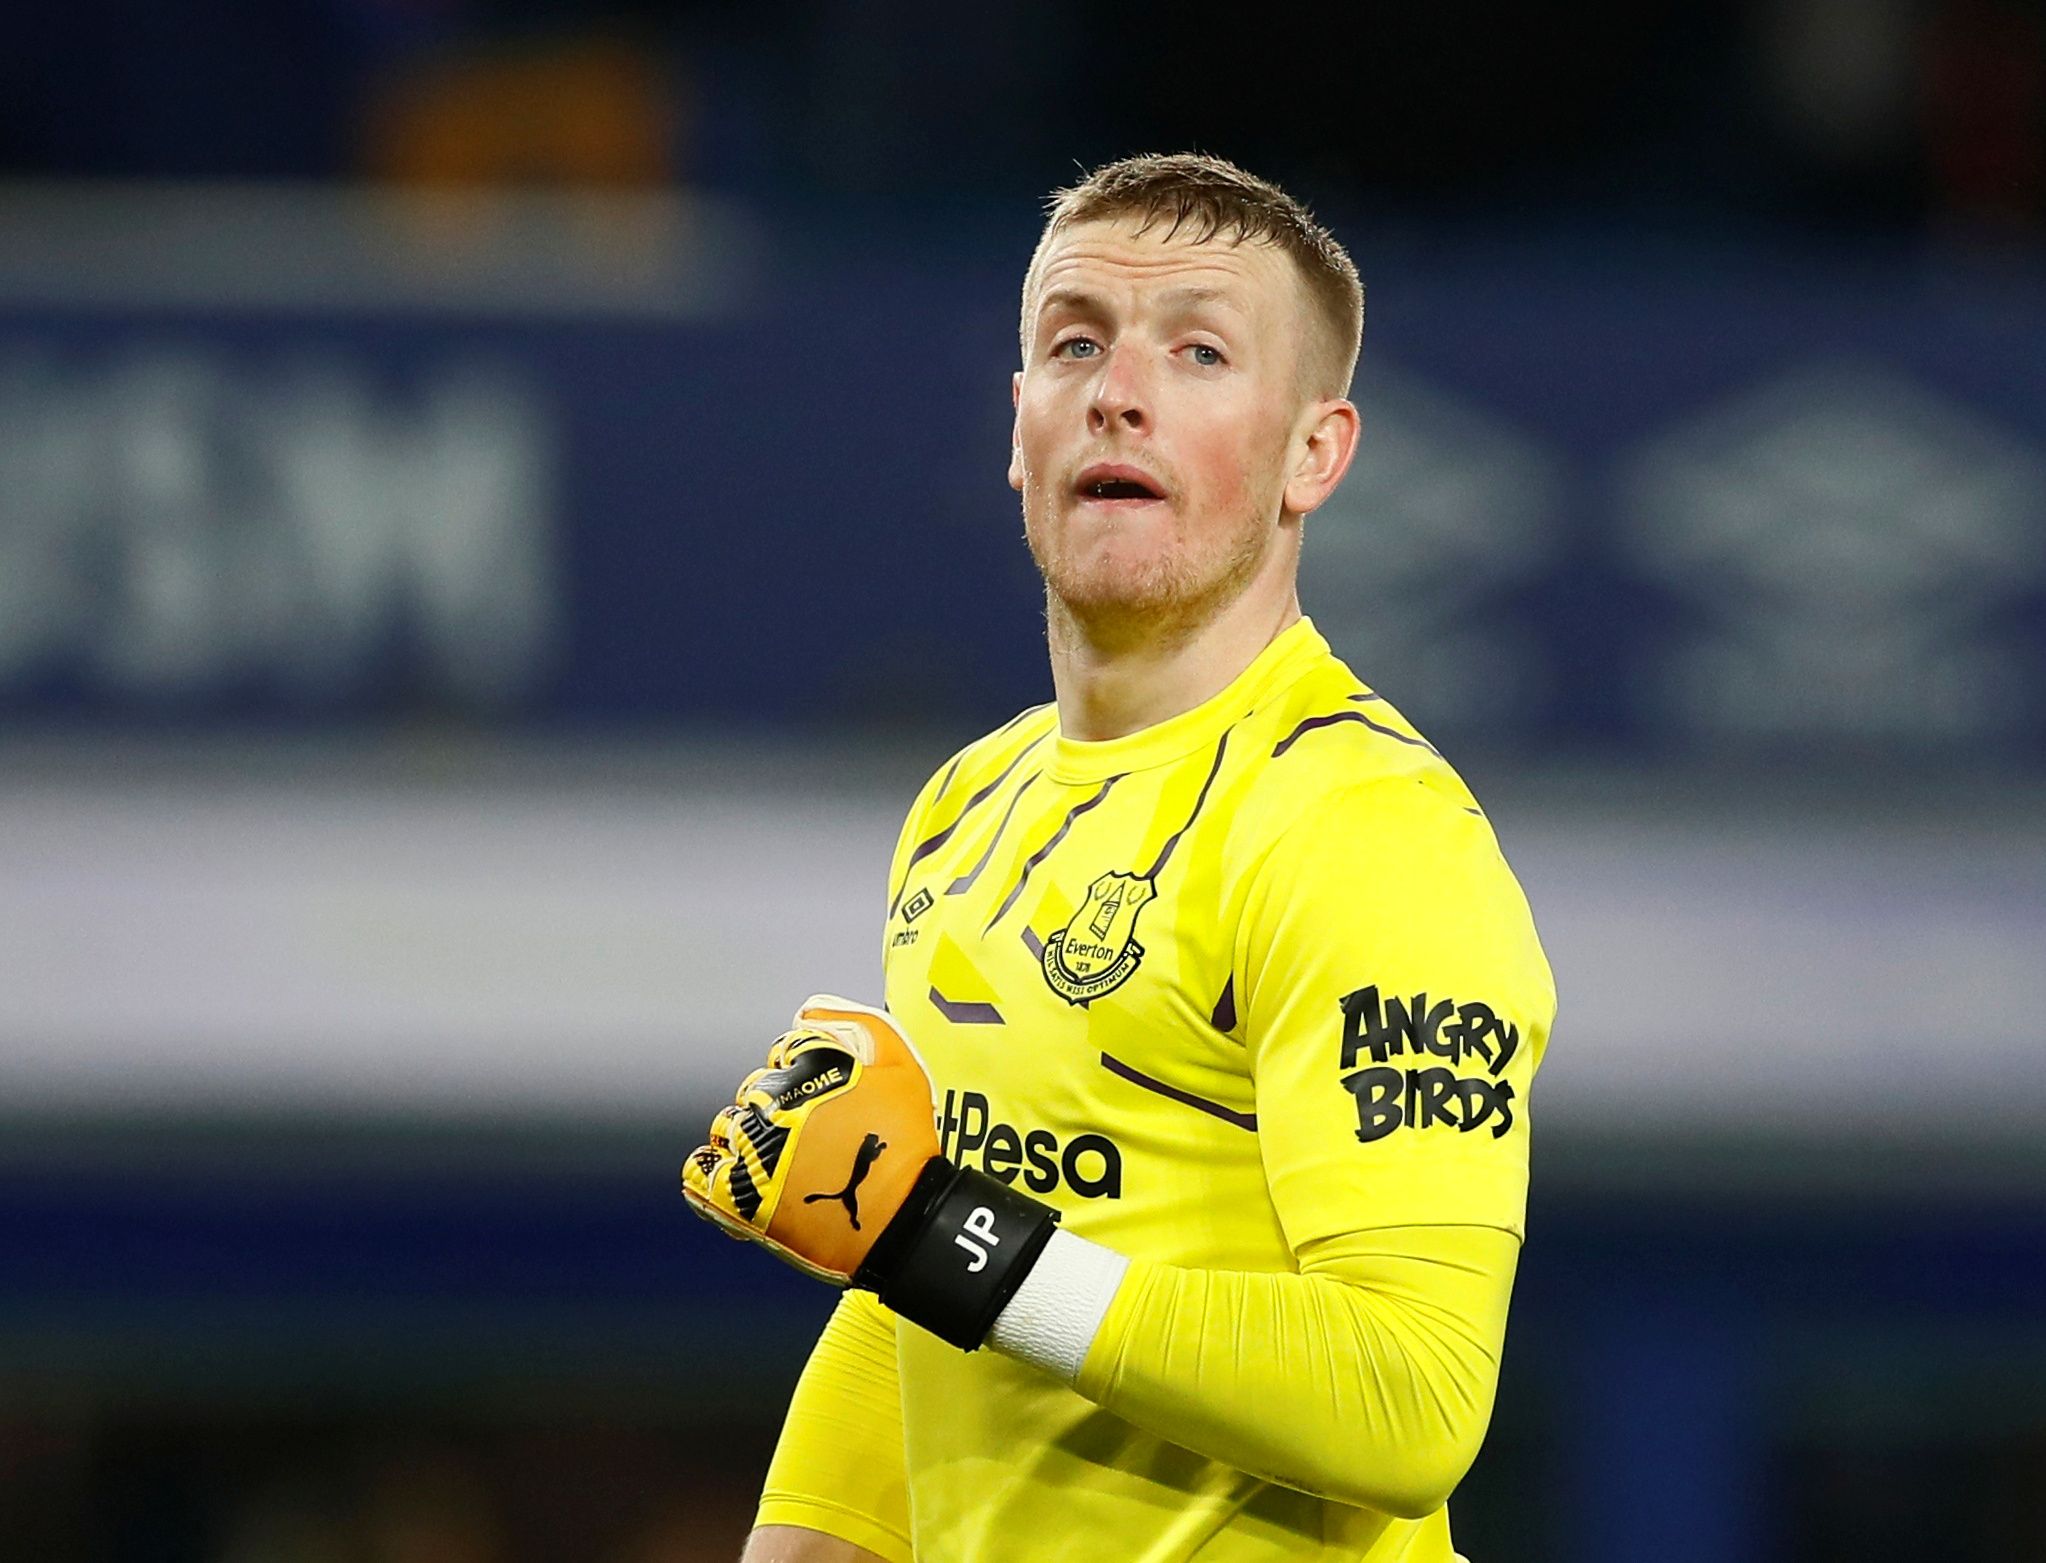 Soccer Football - Premier League - Everton v Newcastle United - Goodison Park, Liverpool, Britain - January 21, 2020  Everton's Jordan Pickford reacts   Action Images via Reuters/Jason Cairnduff  EDITORIAL USE ONLY. No use with unauthorized audio, video, data, fixture lists, club/league logos or 